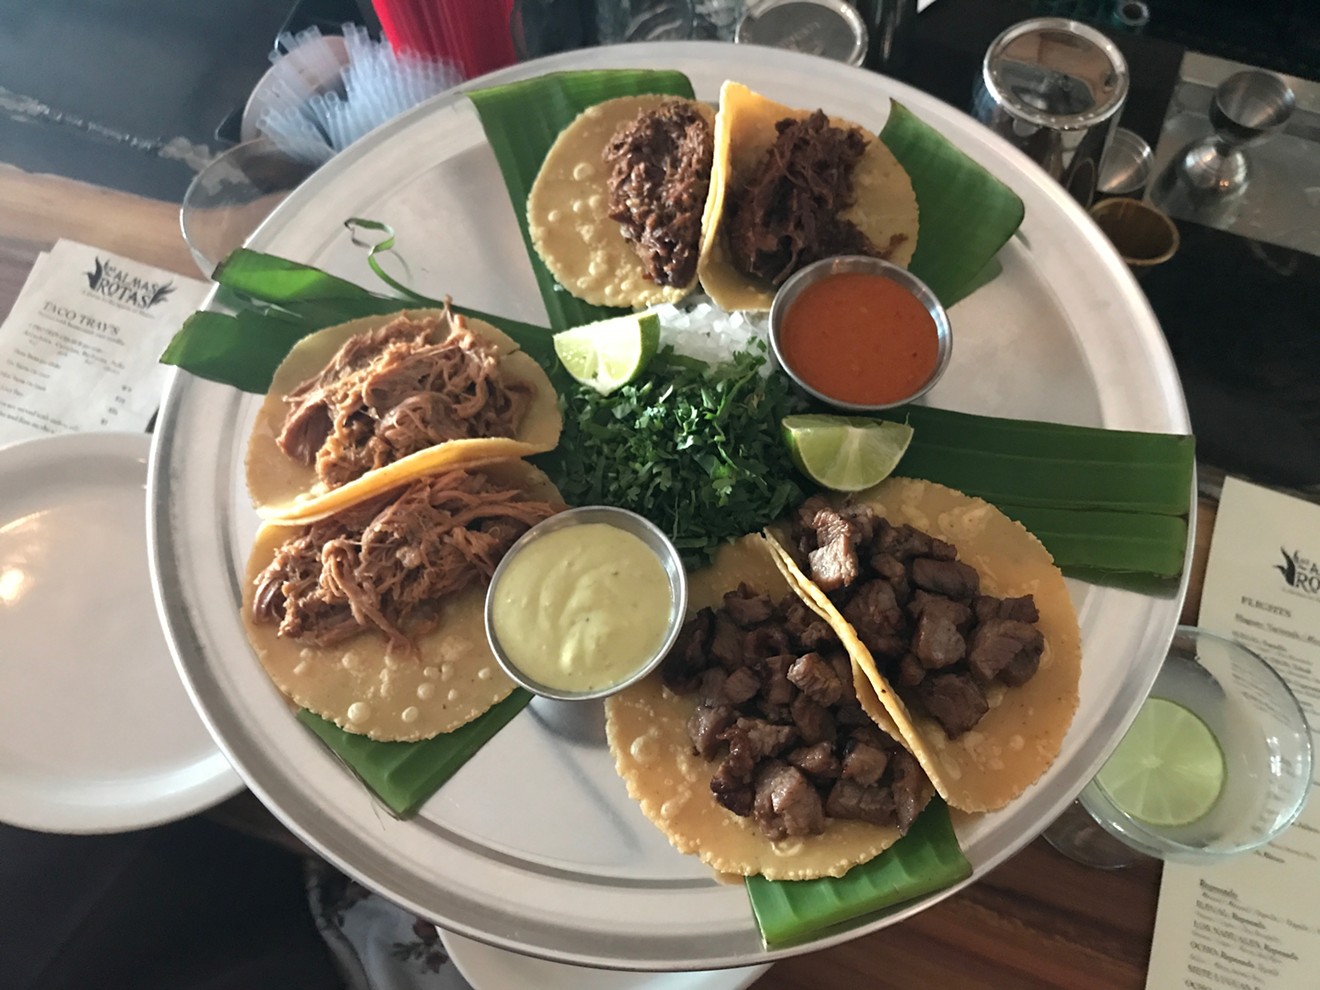 Las Almas Rotas' taco trays are stocked with fresh, housemade tortillas filled with juicy, flavorful fillings like arrachera (steak), al pastor (pork) and vegetarian options.